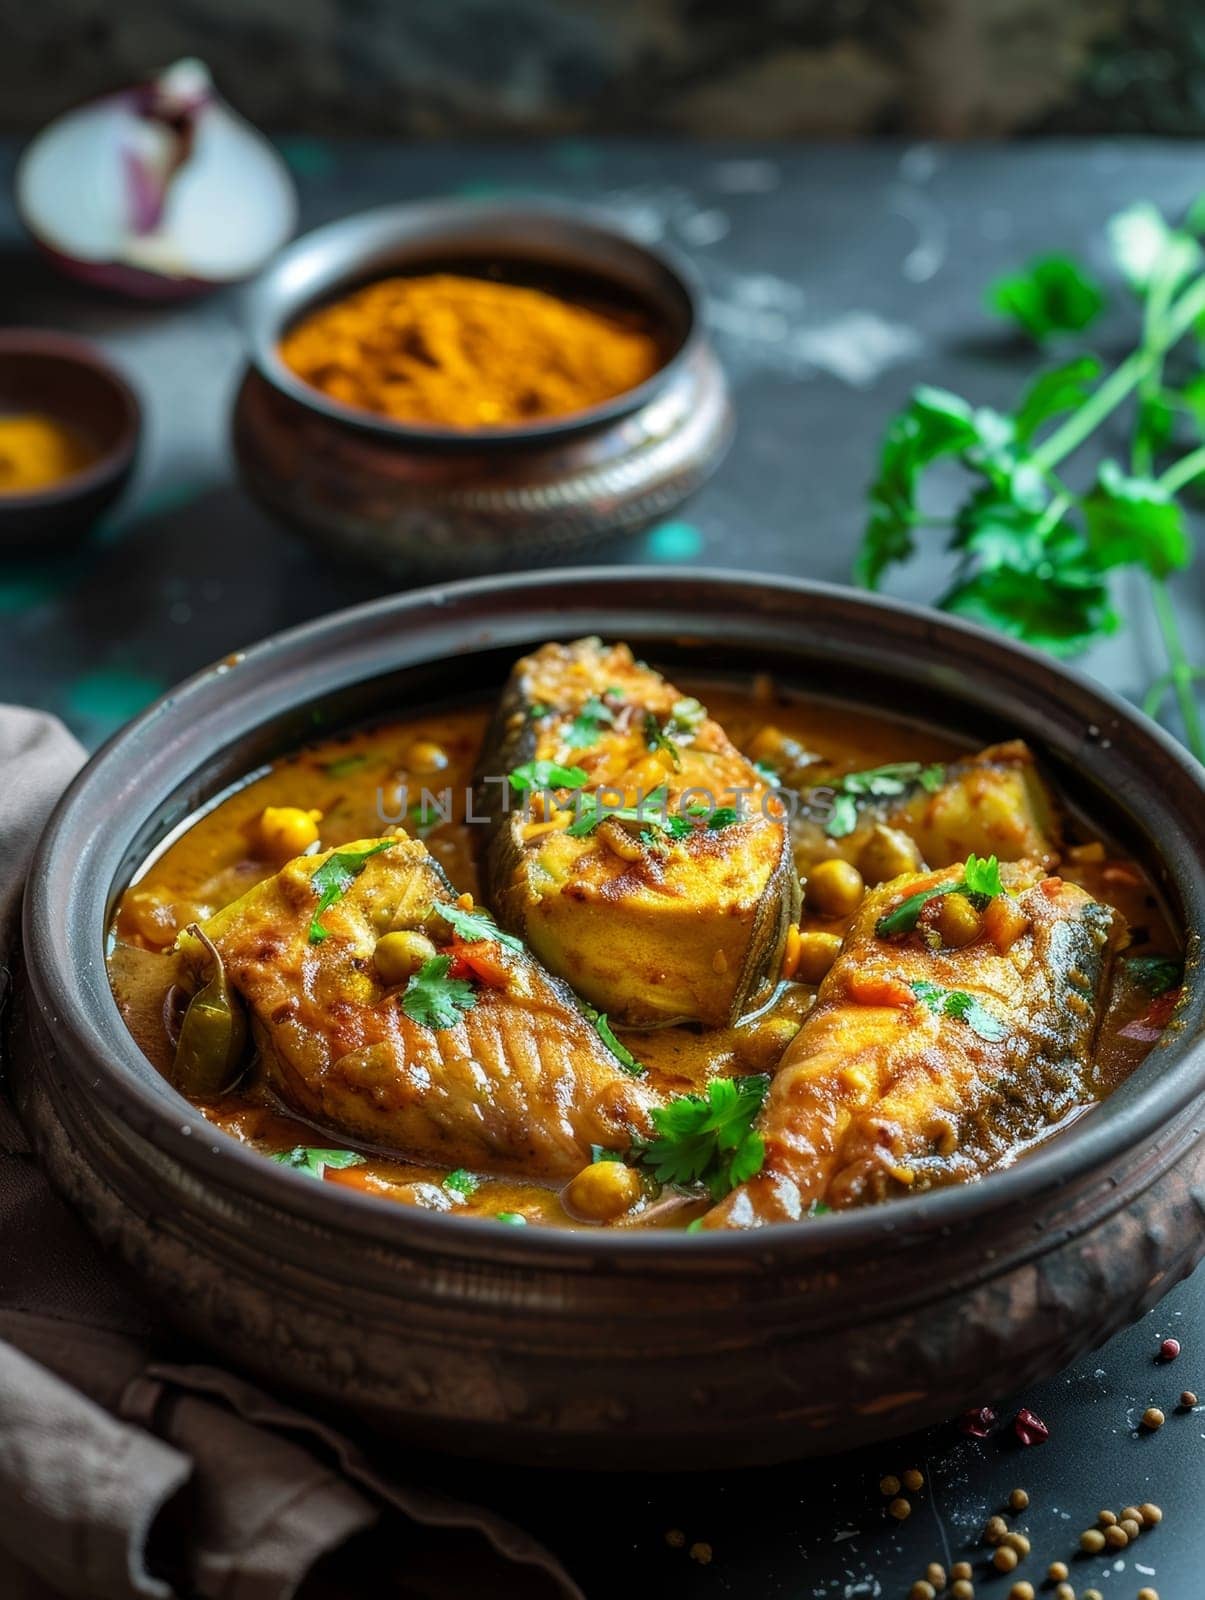 Aromatic Bangladeshi Hilsa fish curry served in a traditional bowl, seasoned with vibrant turmeric and flavorful mustard seeds. A delightful representation of South Asian cuisine